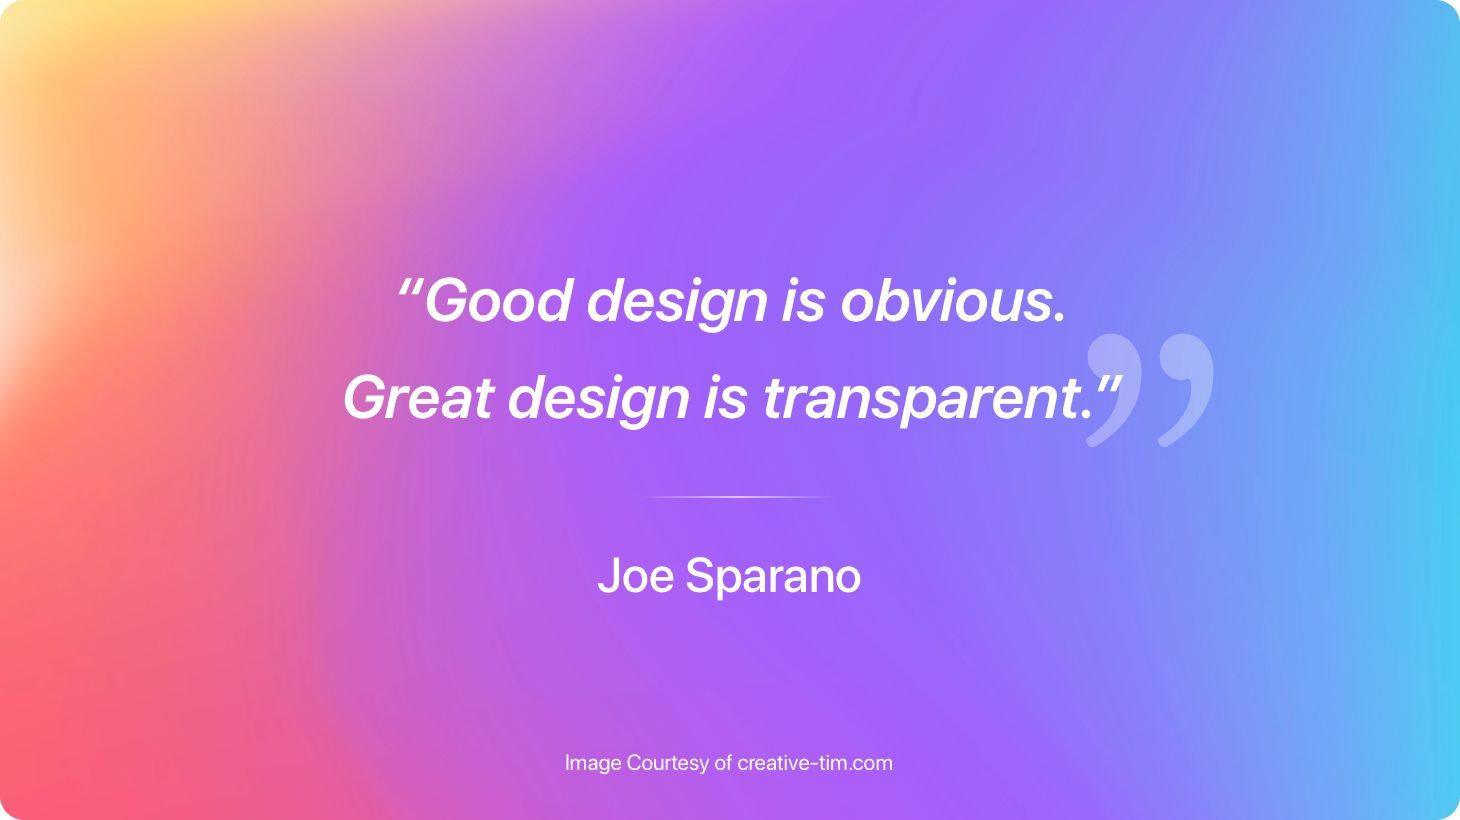 A quote from Joe Sparano that reads, "Good design is obvious. Great design is transparent."